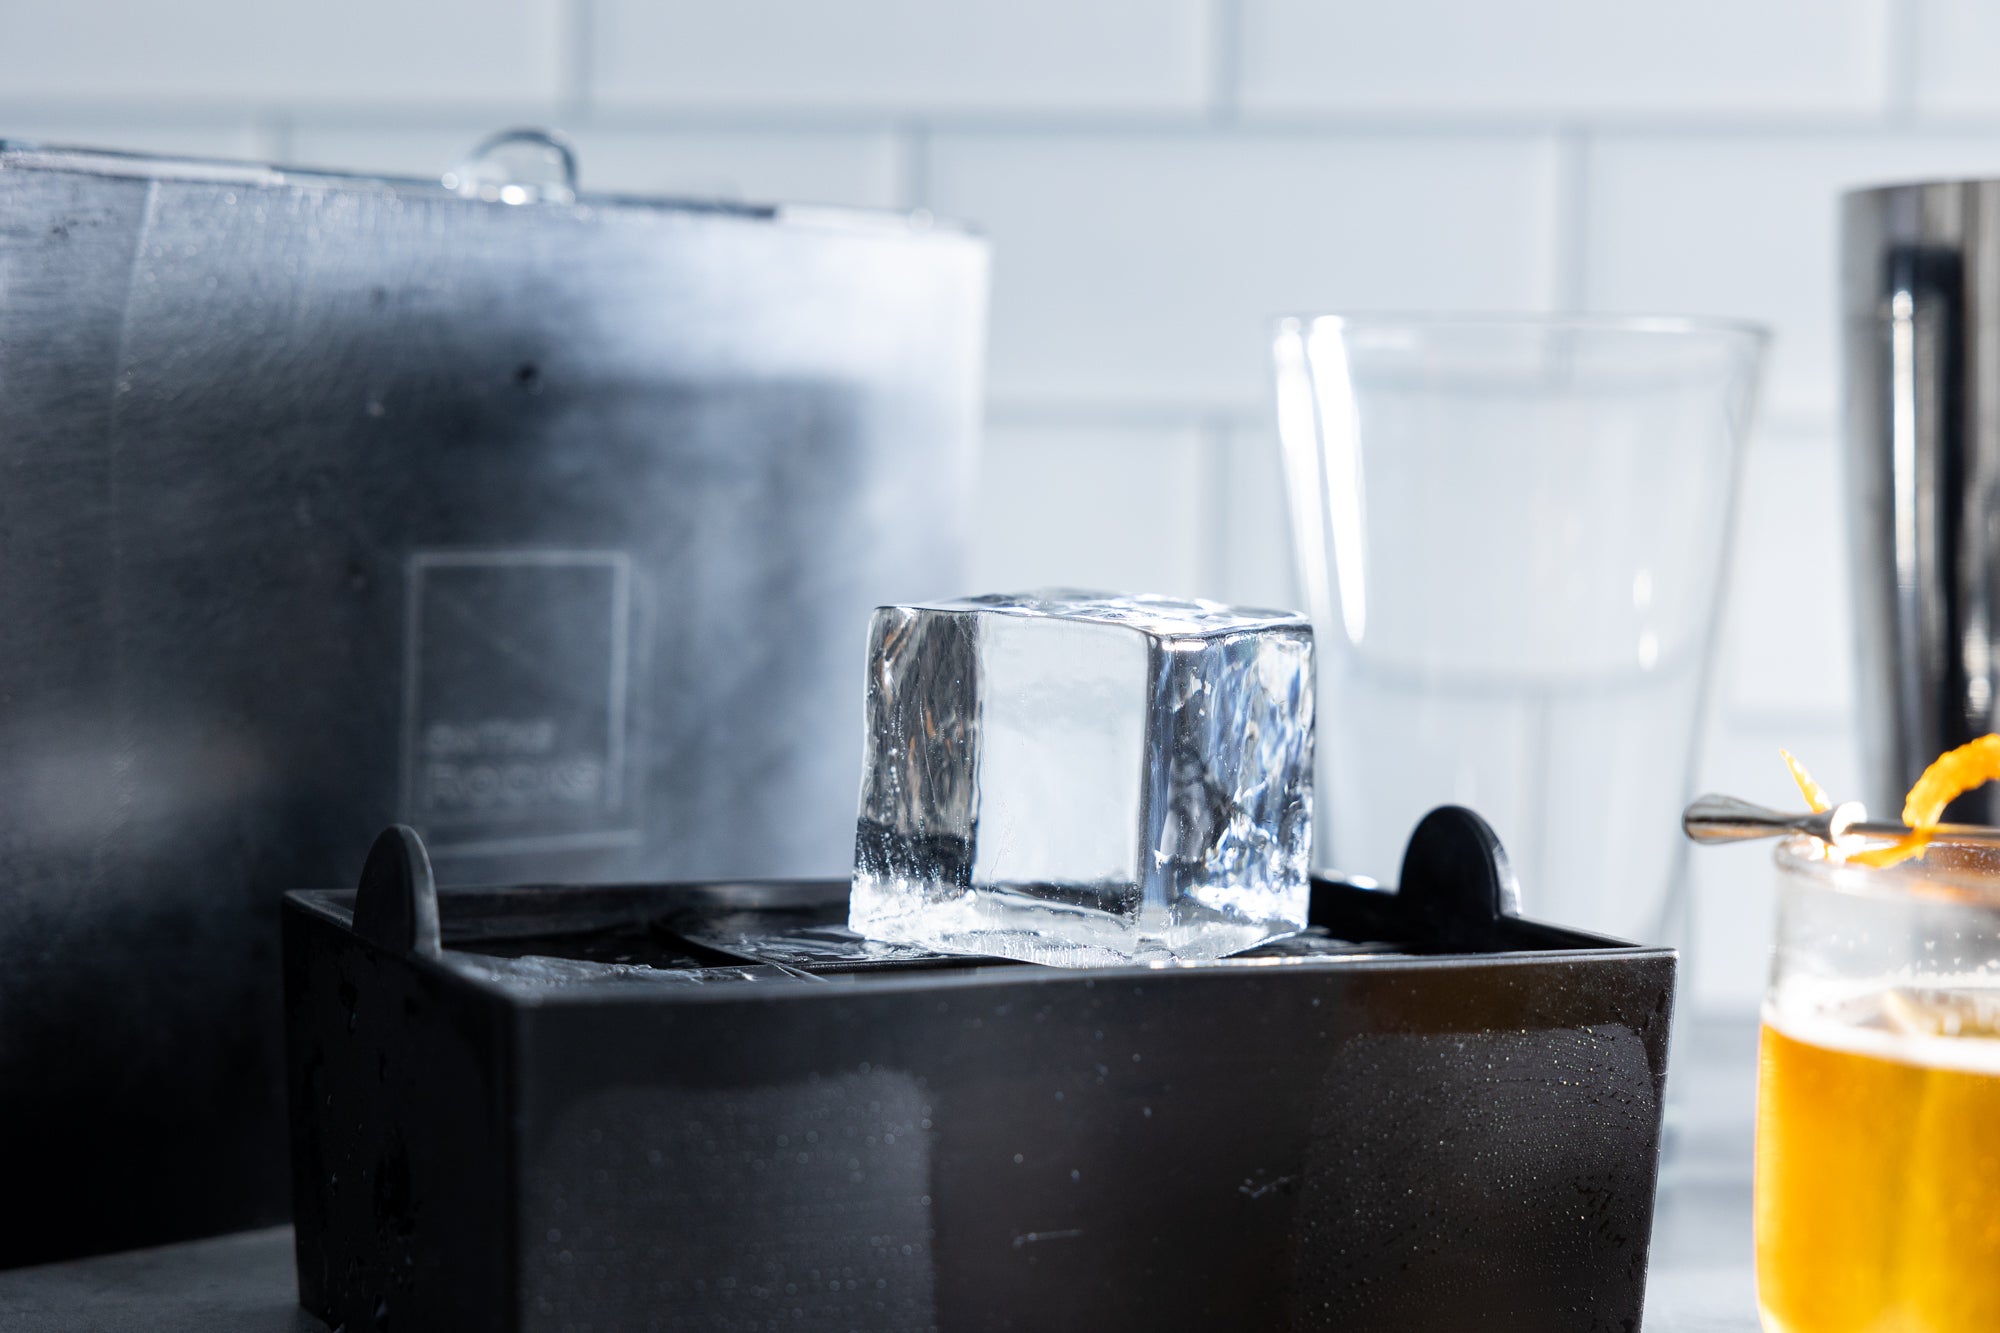 Can You Really Make Crystal-Clear Ice Cubes With Boiling Water?